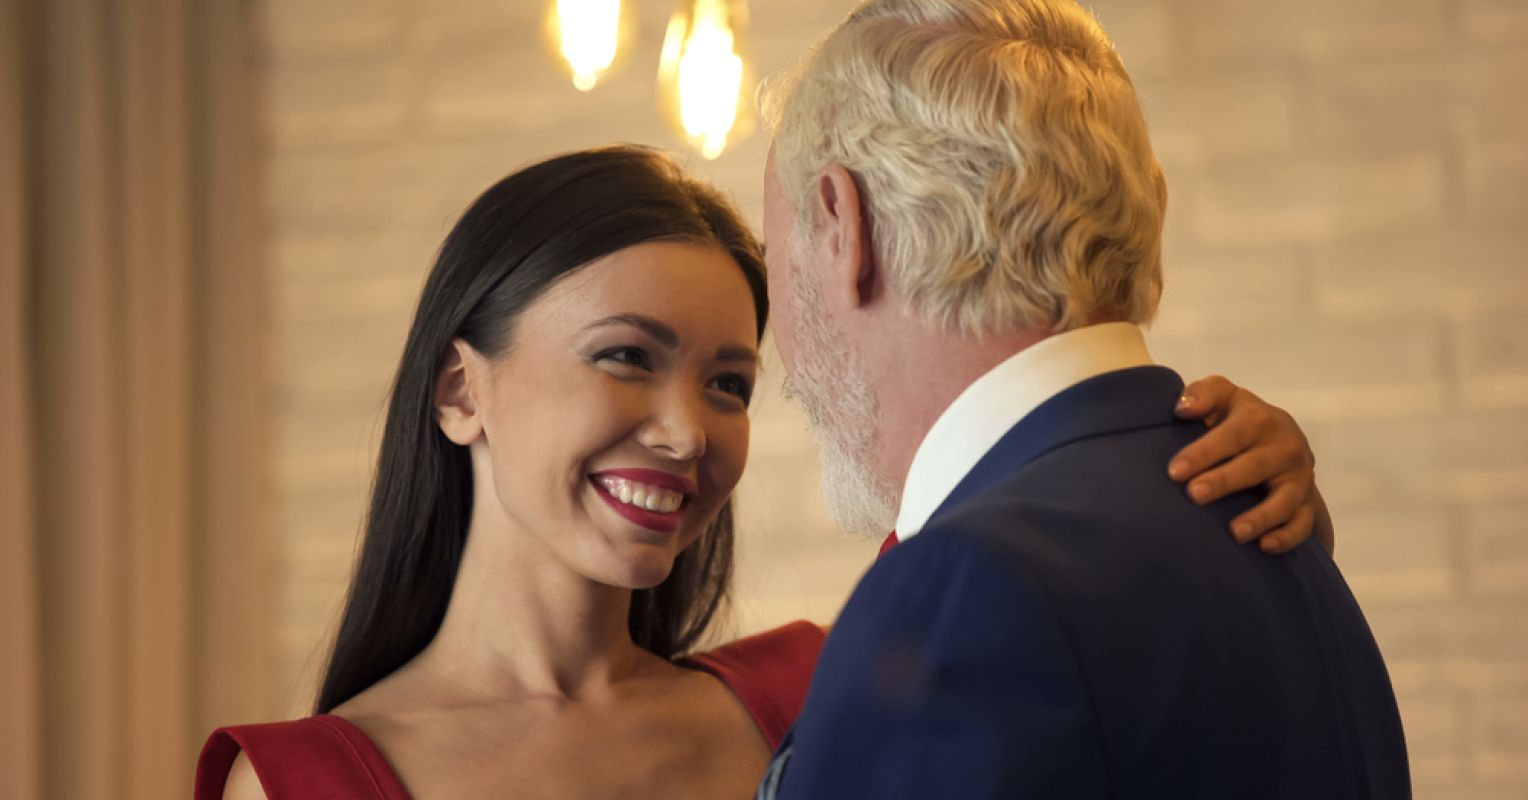 Why Many Young Women Prefer to Date Older Men Psychology Today